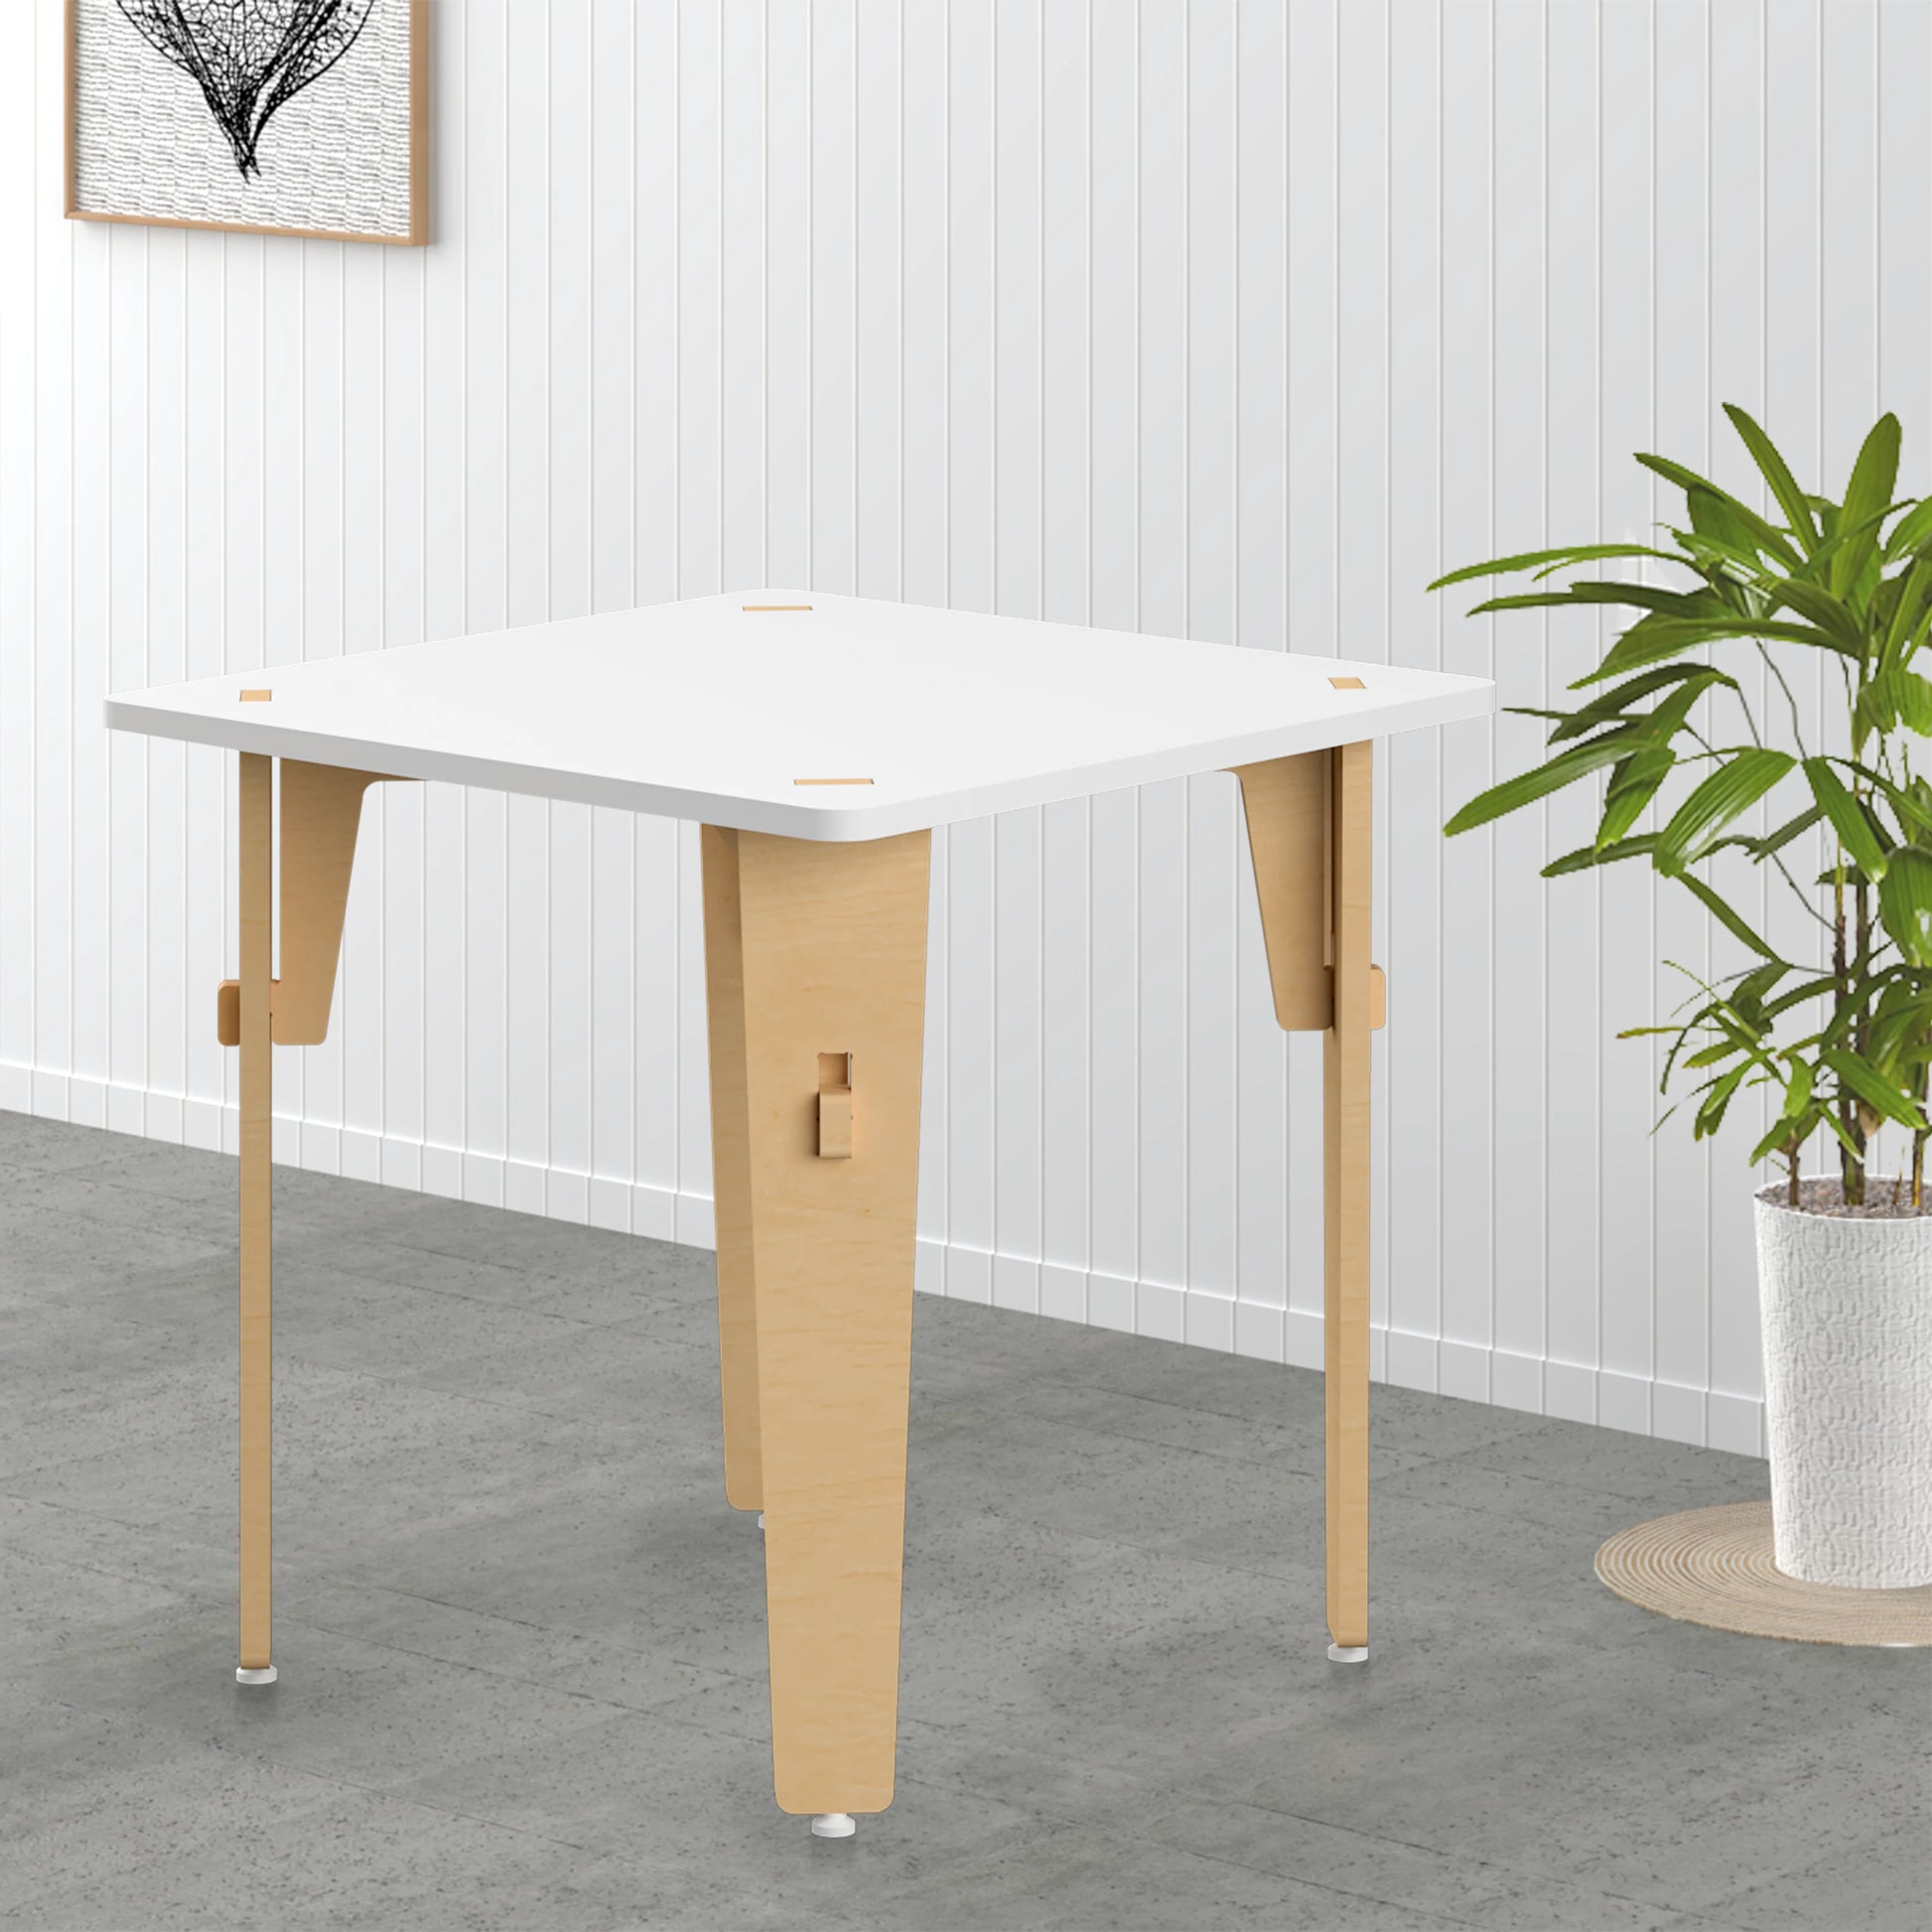 Buy Lime Fig Wooden Table - White (21 Inches) - Learning Furniture - SkilloToys.com